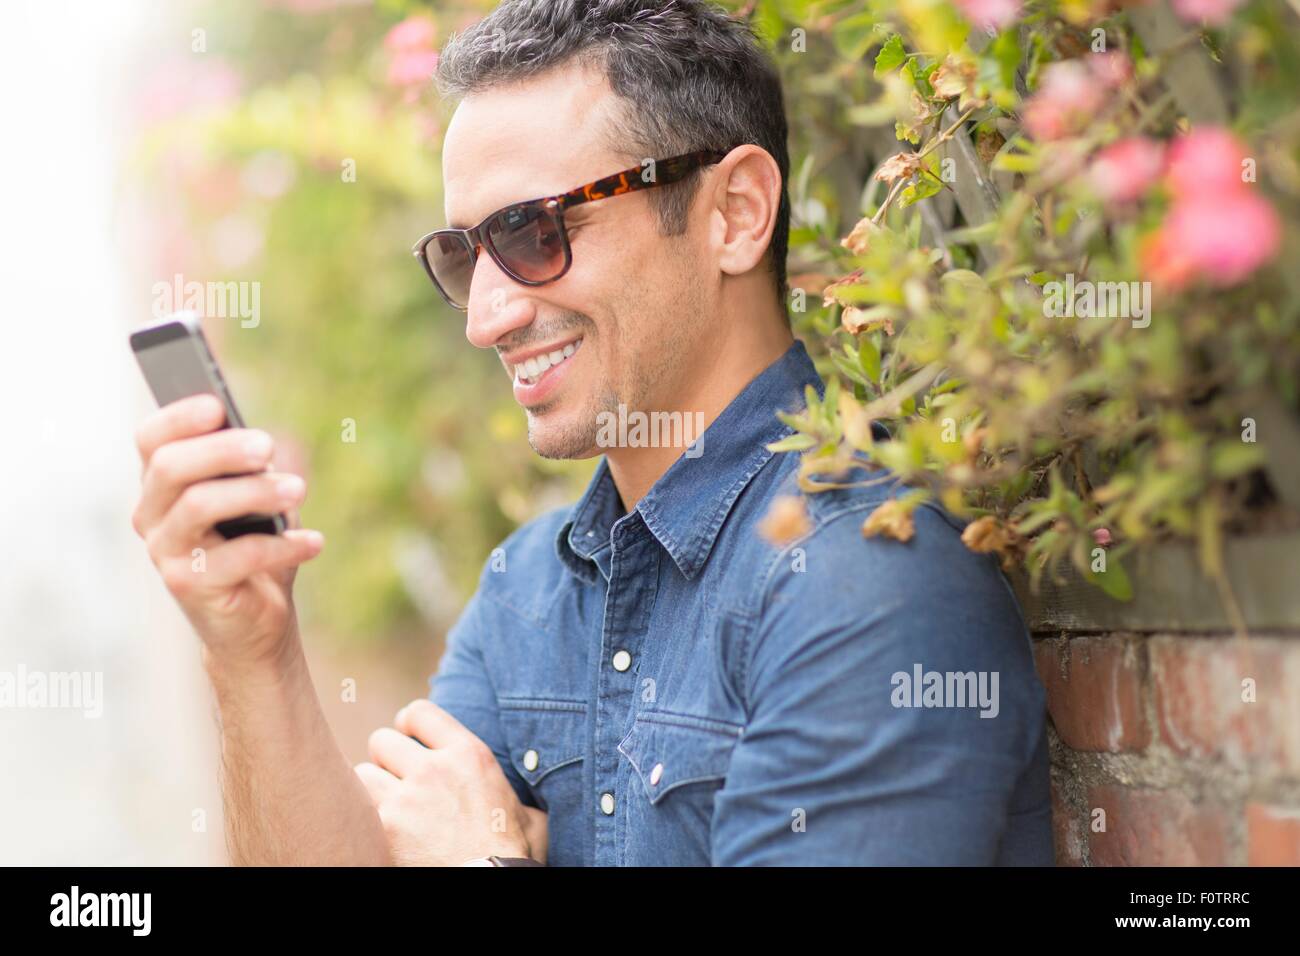 Mid adult man, outdoors, using mobile phone Stock Photo